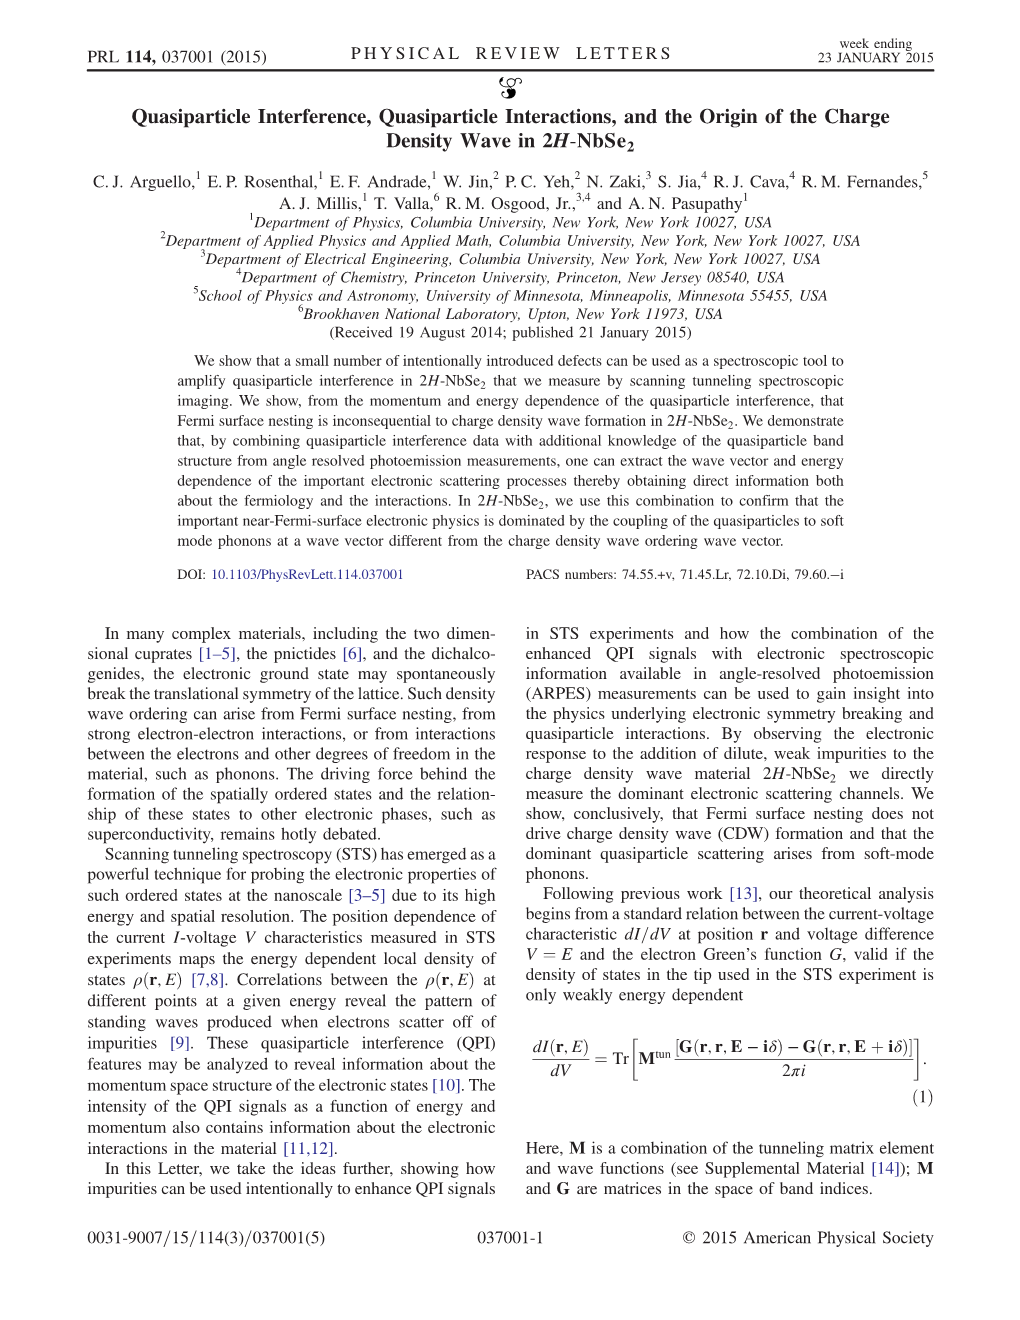 Quasiparticle Interference, Quasiparticle Interactions, and the Origin of the Charge Density Wave in 2H-Nbse2